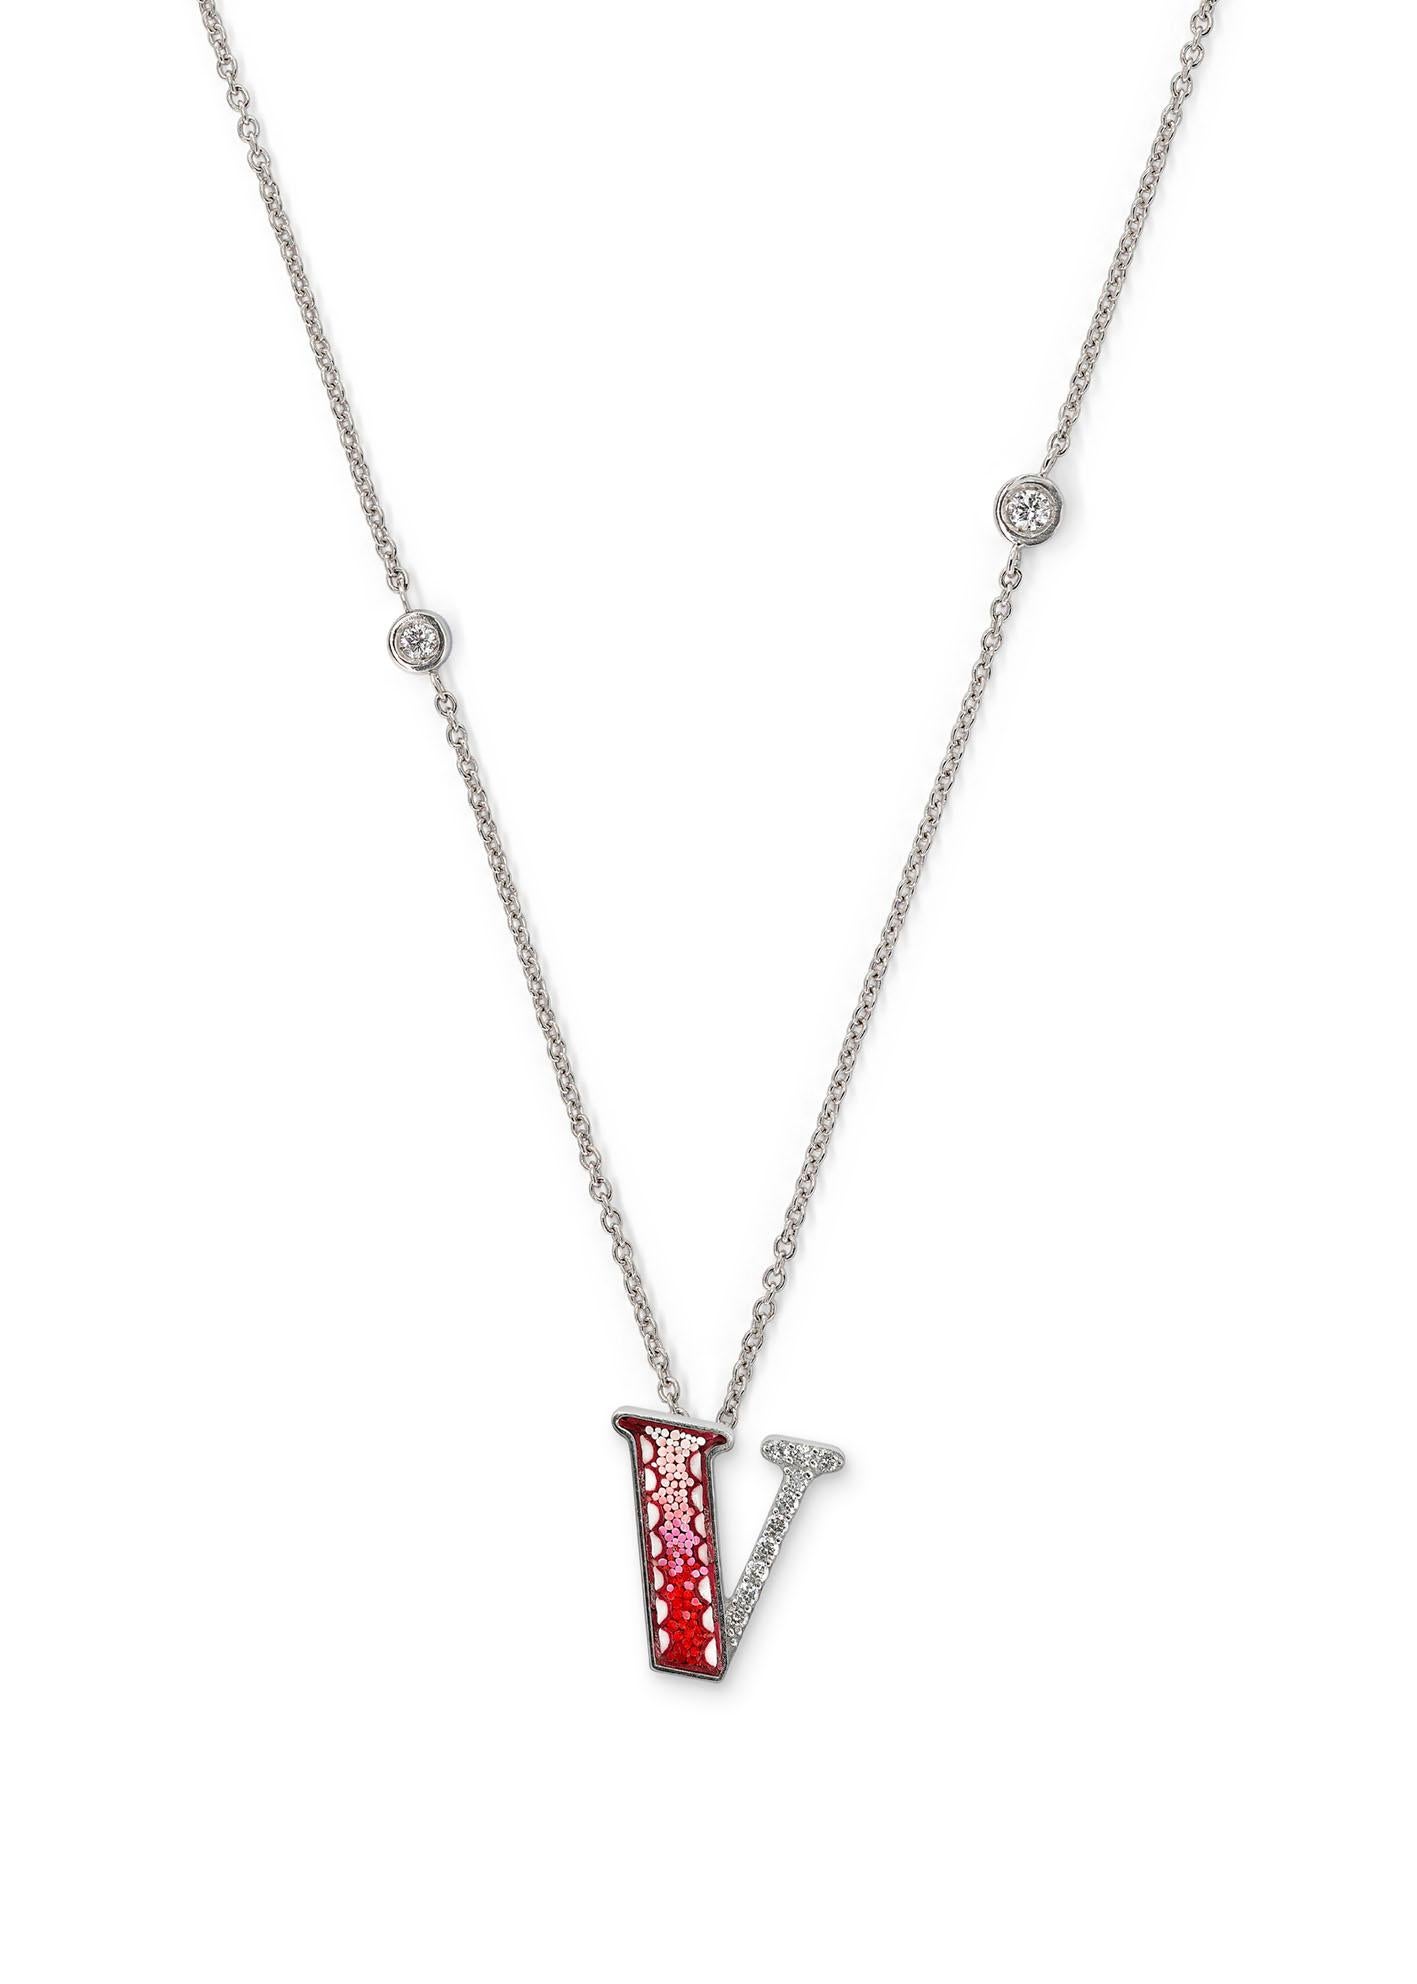 Brilliant Cut Necklace Letter V White Gold White Diamonds Hand Decorated with Micromosaic For Sale